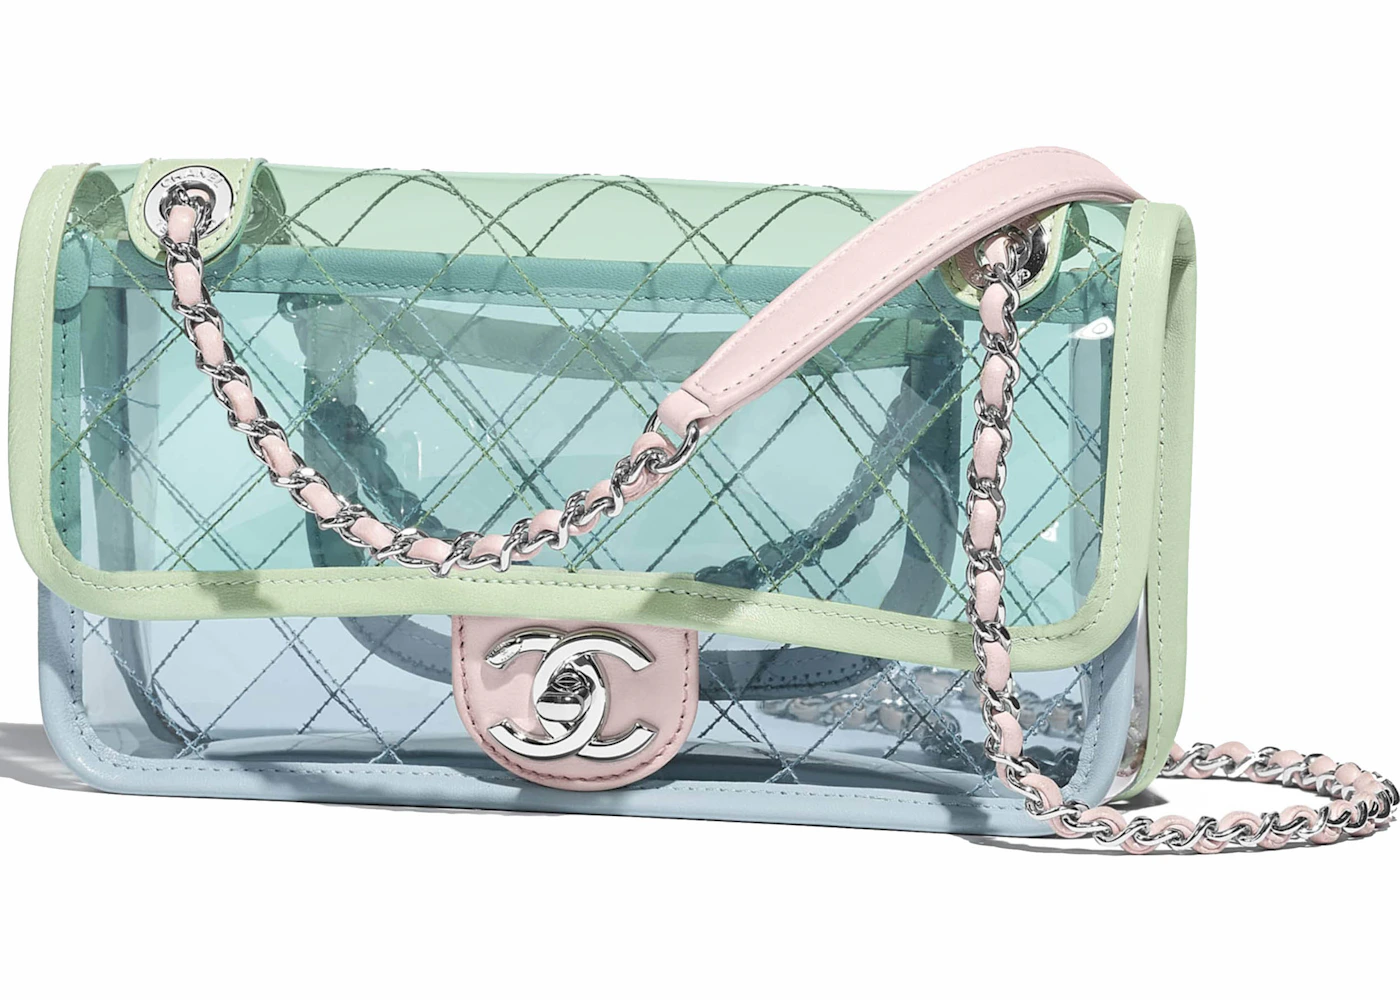 From Chanel to Louis Vuitton: 5 hot see-through bags that